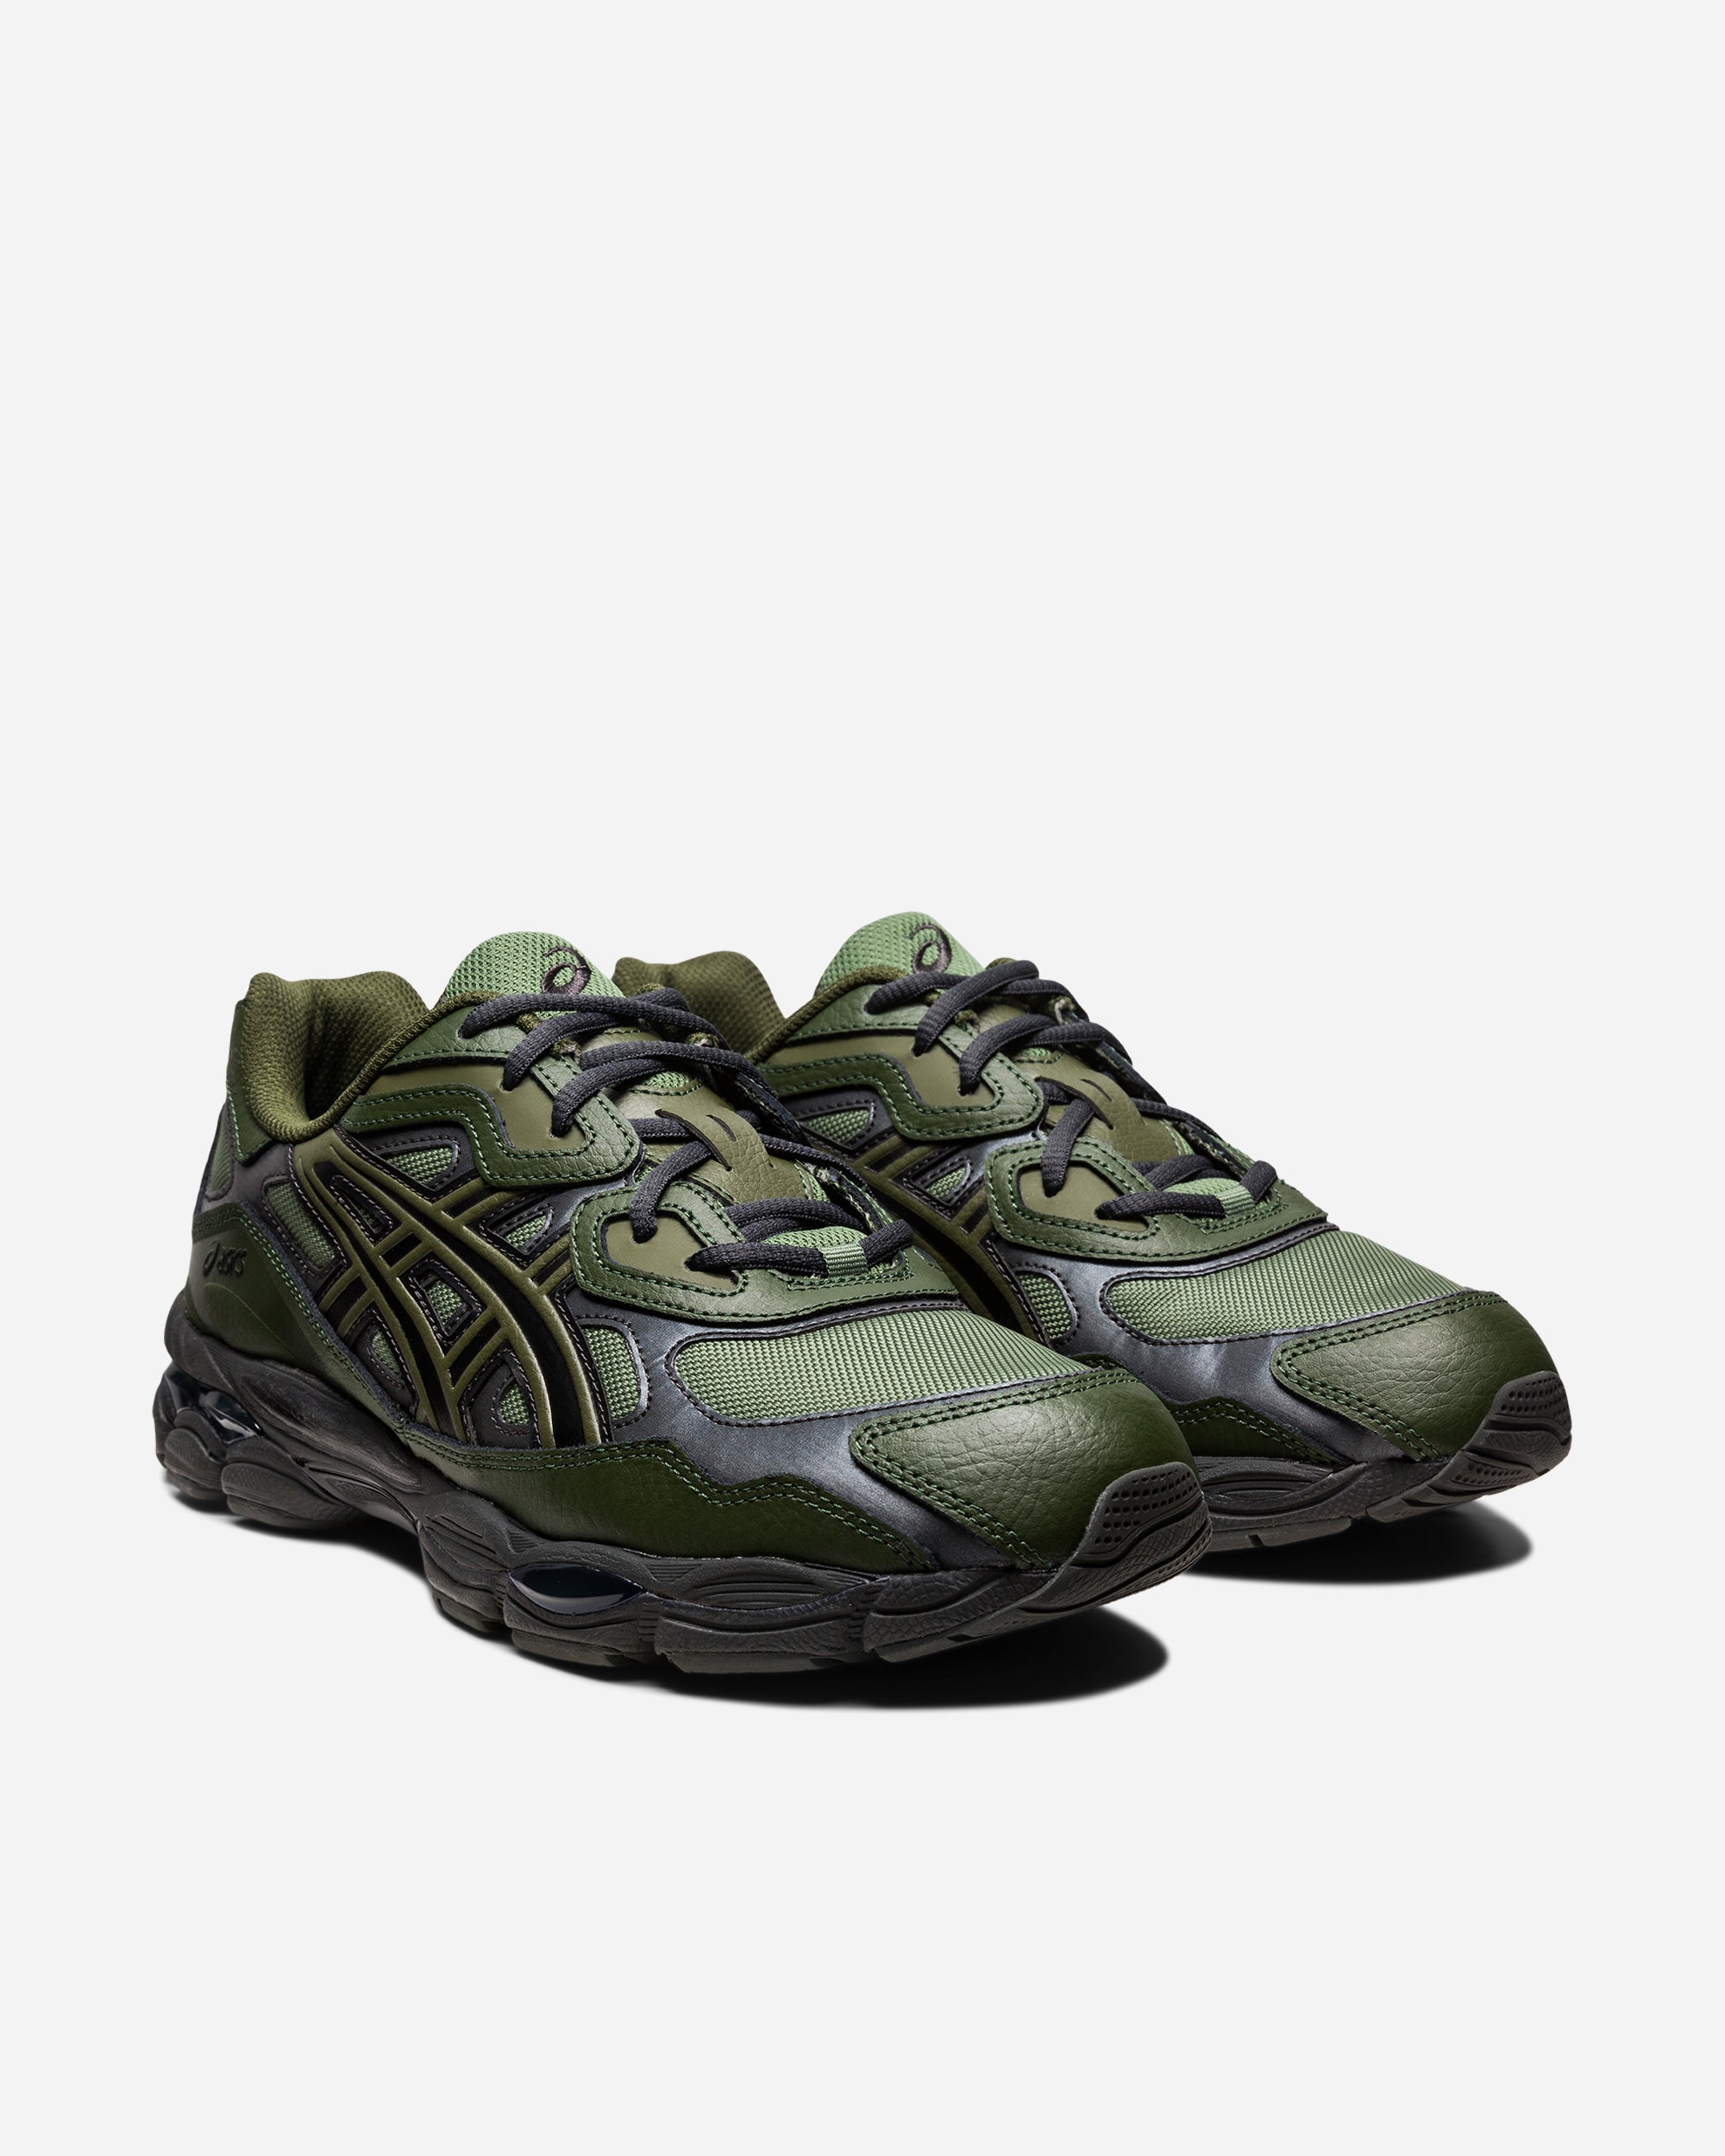 Asics GEL-NYC MOSS/FOREST 1203A280-300